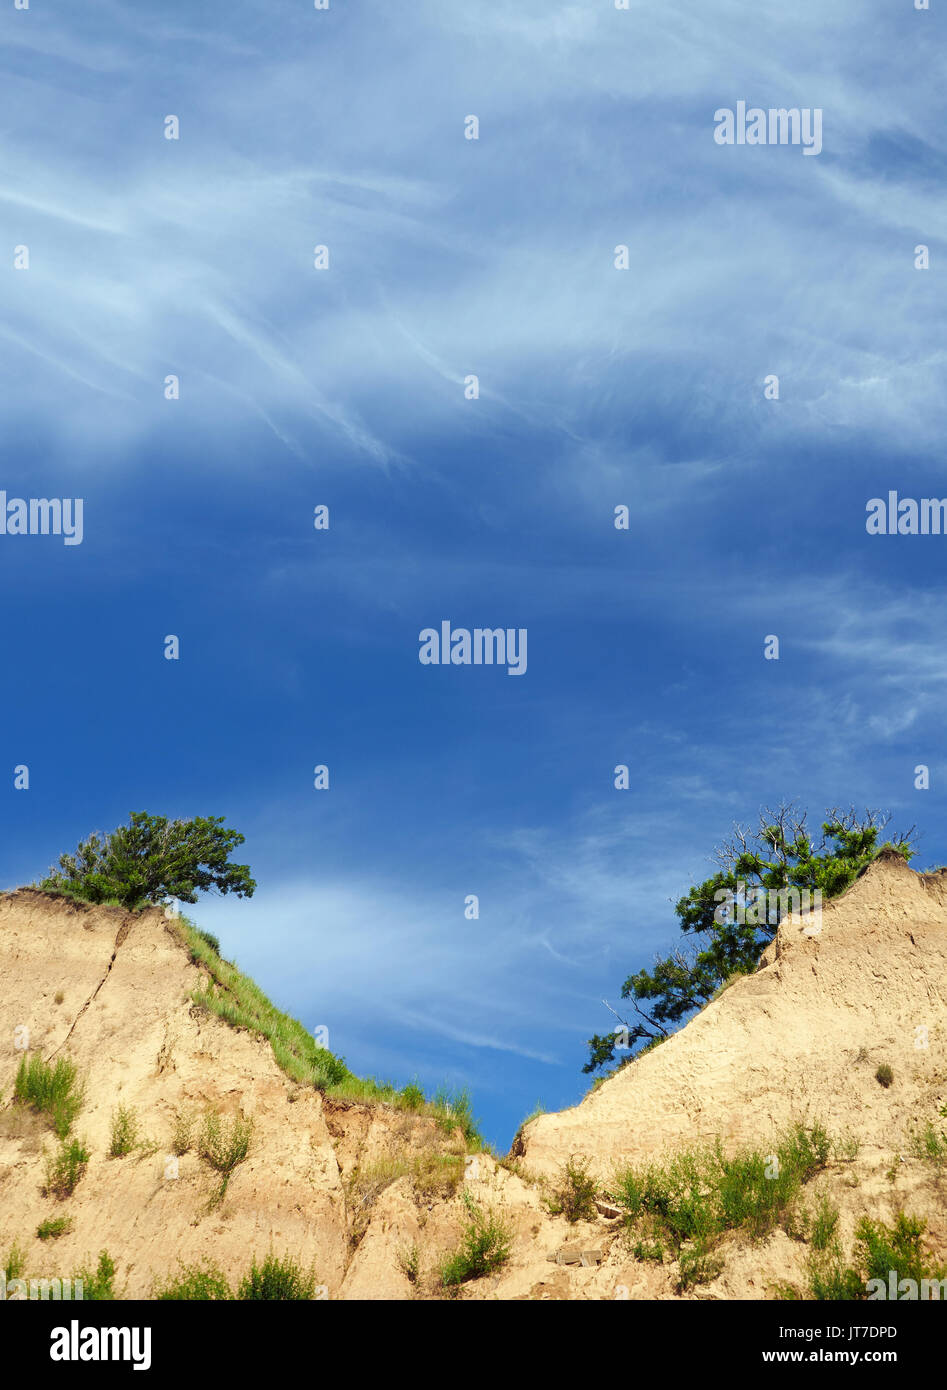 Clear blue sky over twin cliff peaks with trees Stock Photo